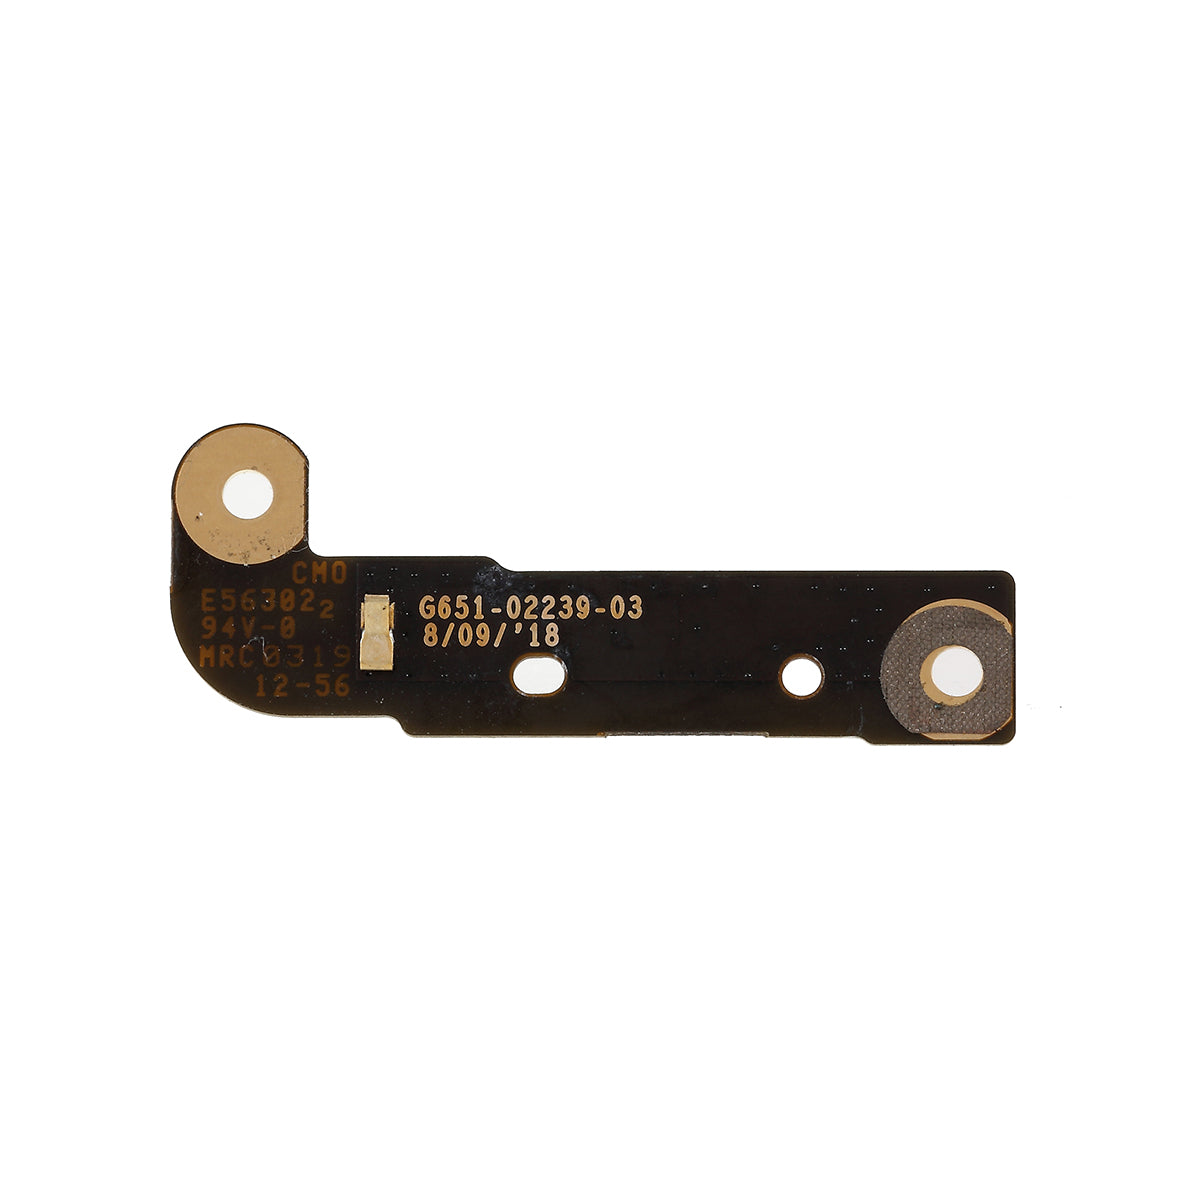 OEM Antenna Connector Board for Google Pixel 3a XL